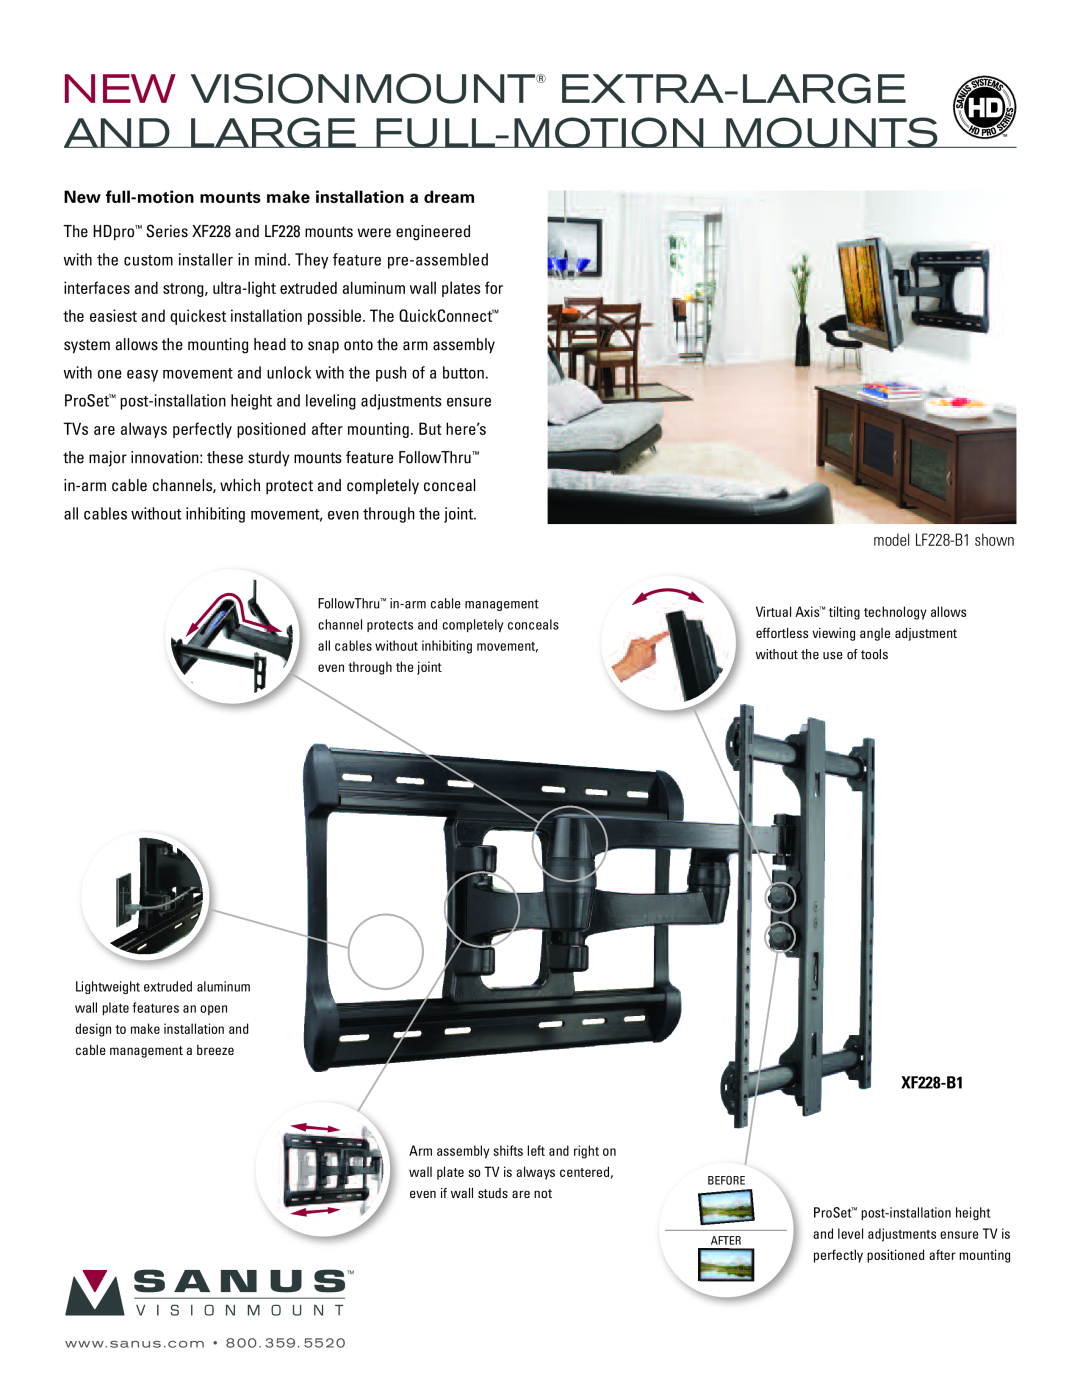 Sanus Systems manual New Visionmount Extra-Large And Large Full-Motion Mounts, model LF228-B1 shown, XF228-B1 